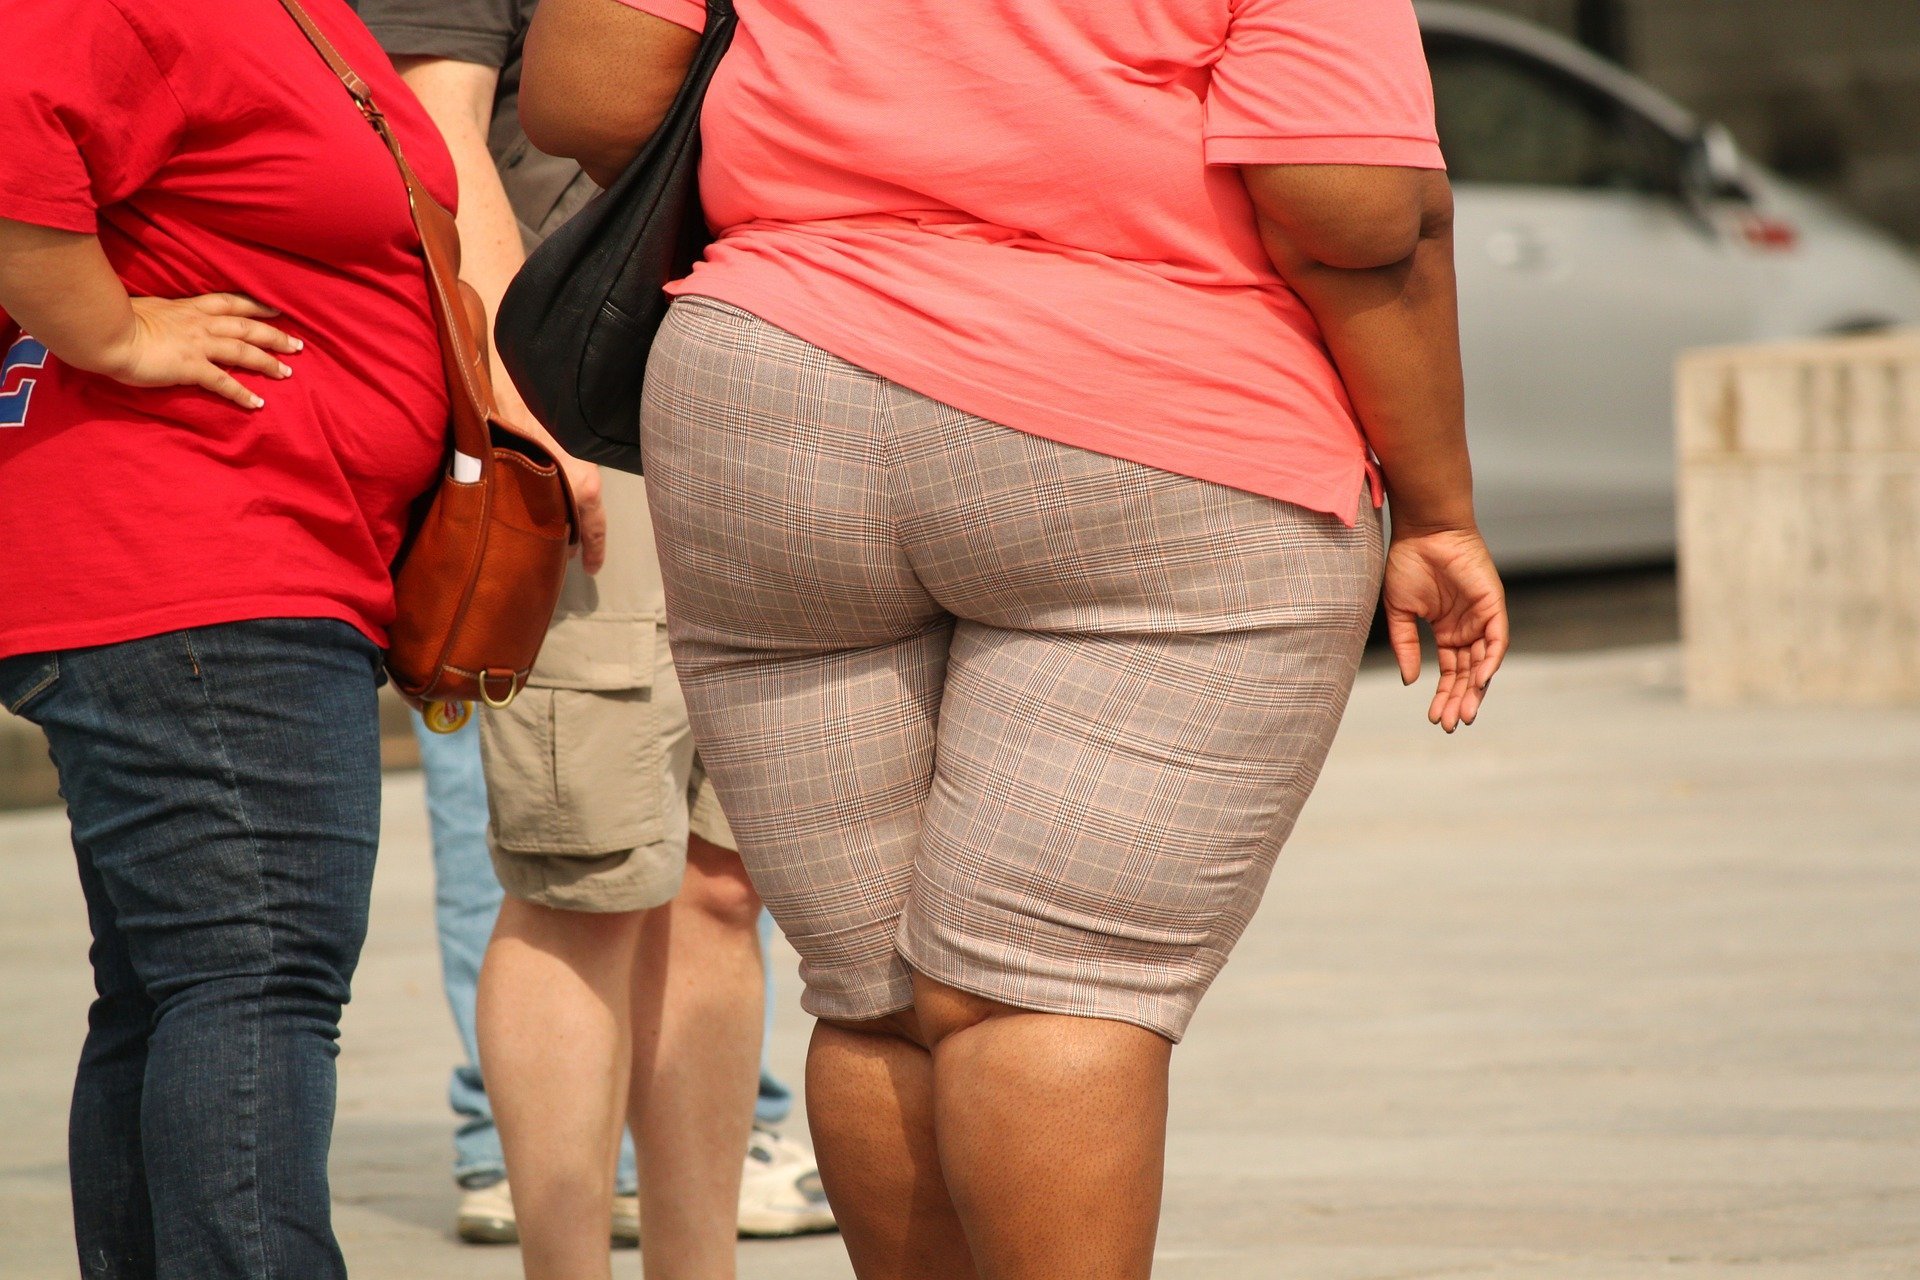 Obesity can save lives in case of severe bacterial infection